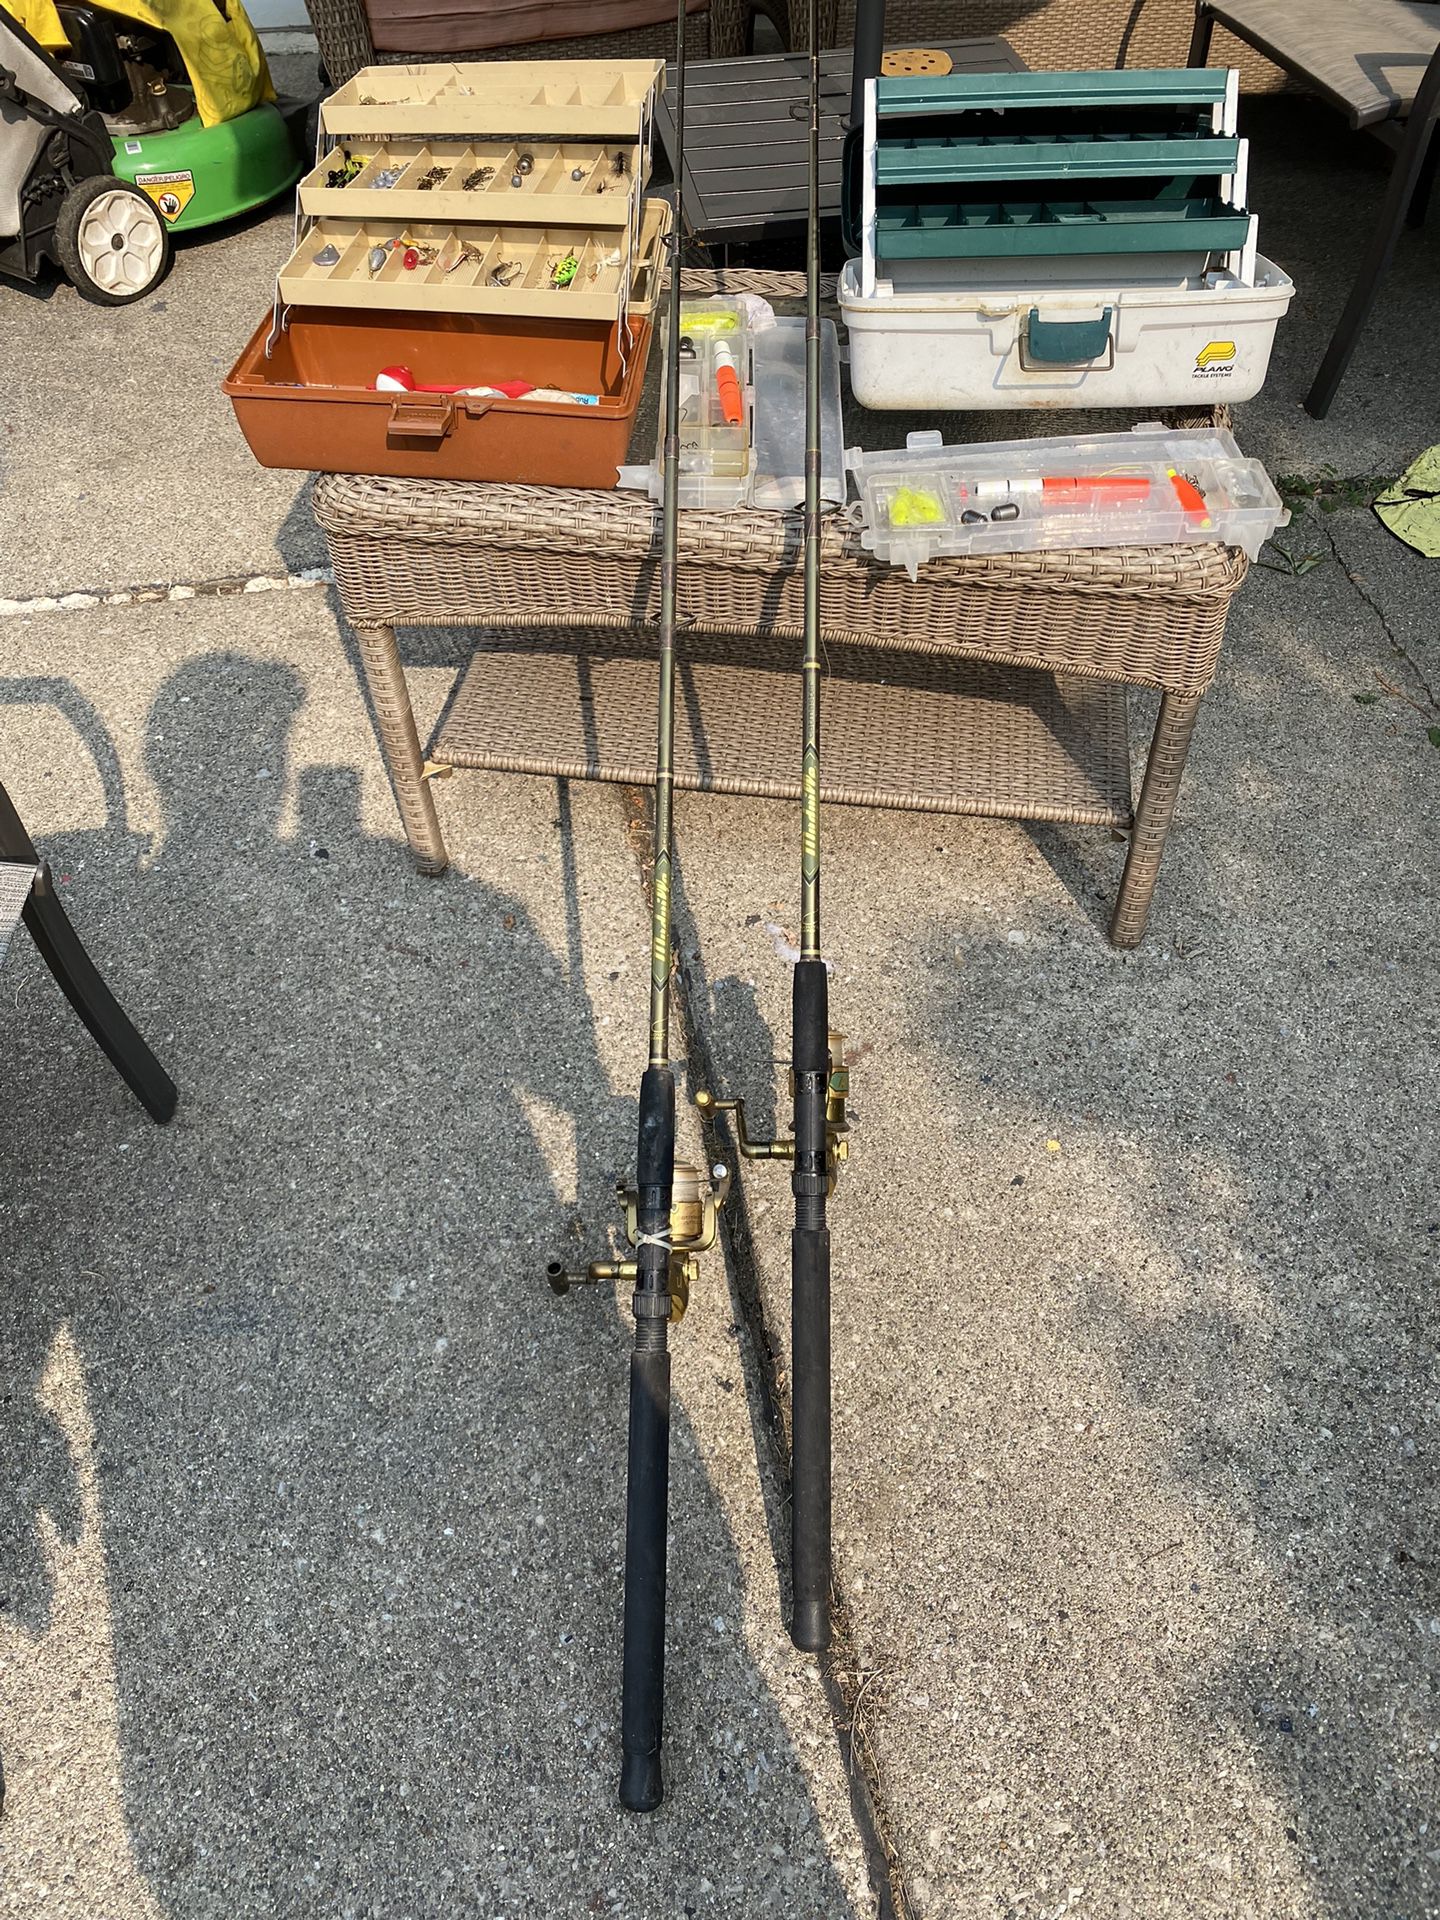  2 Fishing Rods And Equipment 